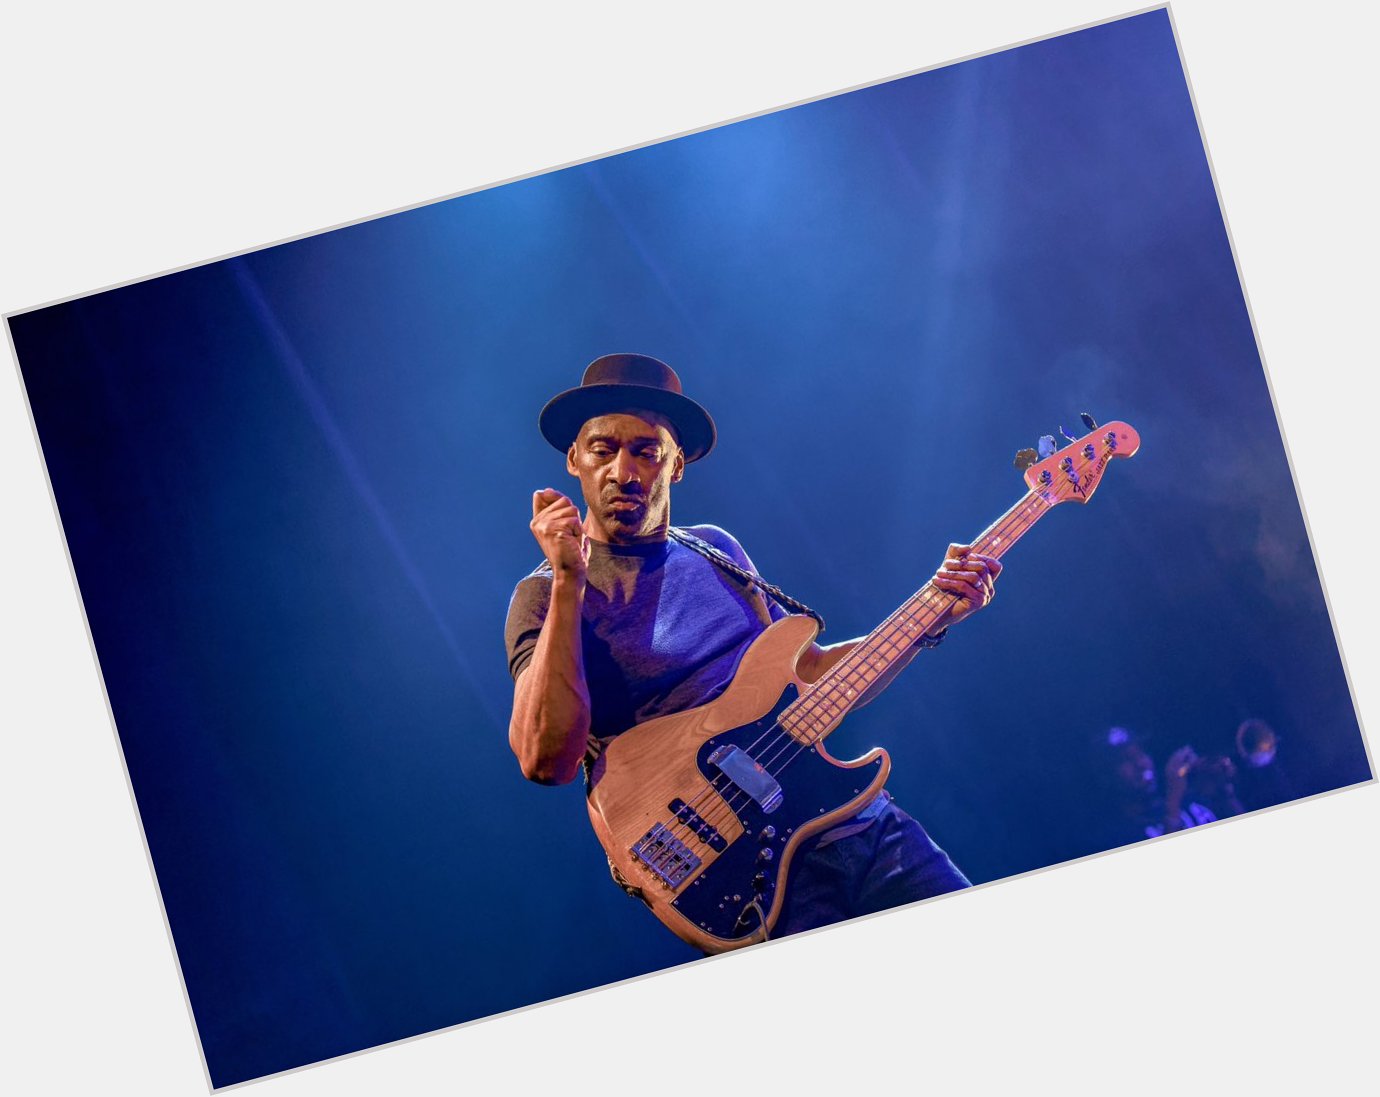 Wishing a Happy Birthday to the great bassist Marcus Miller!  